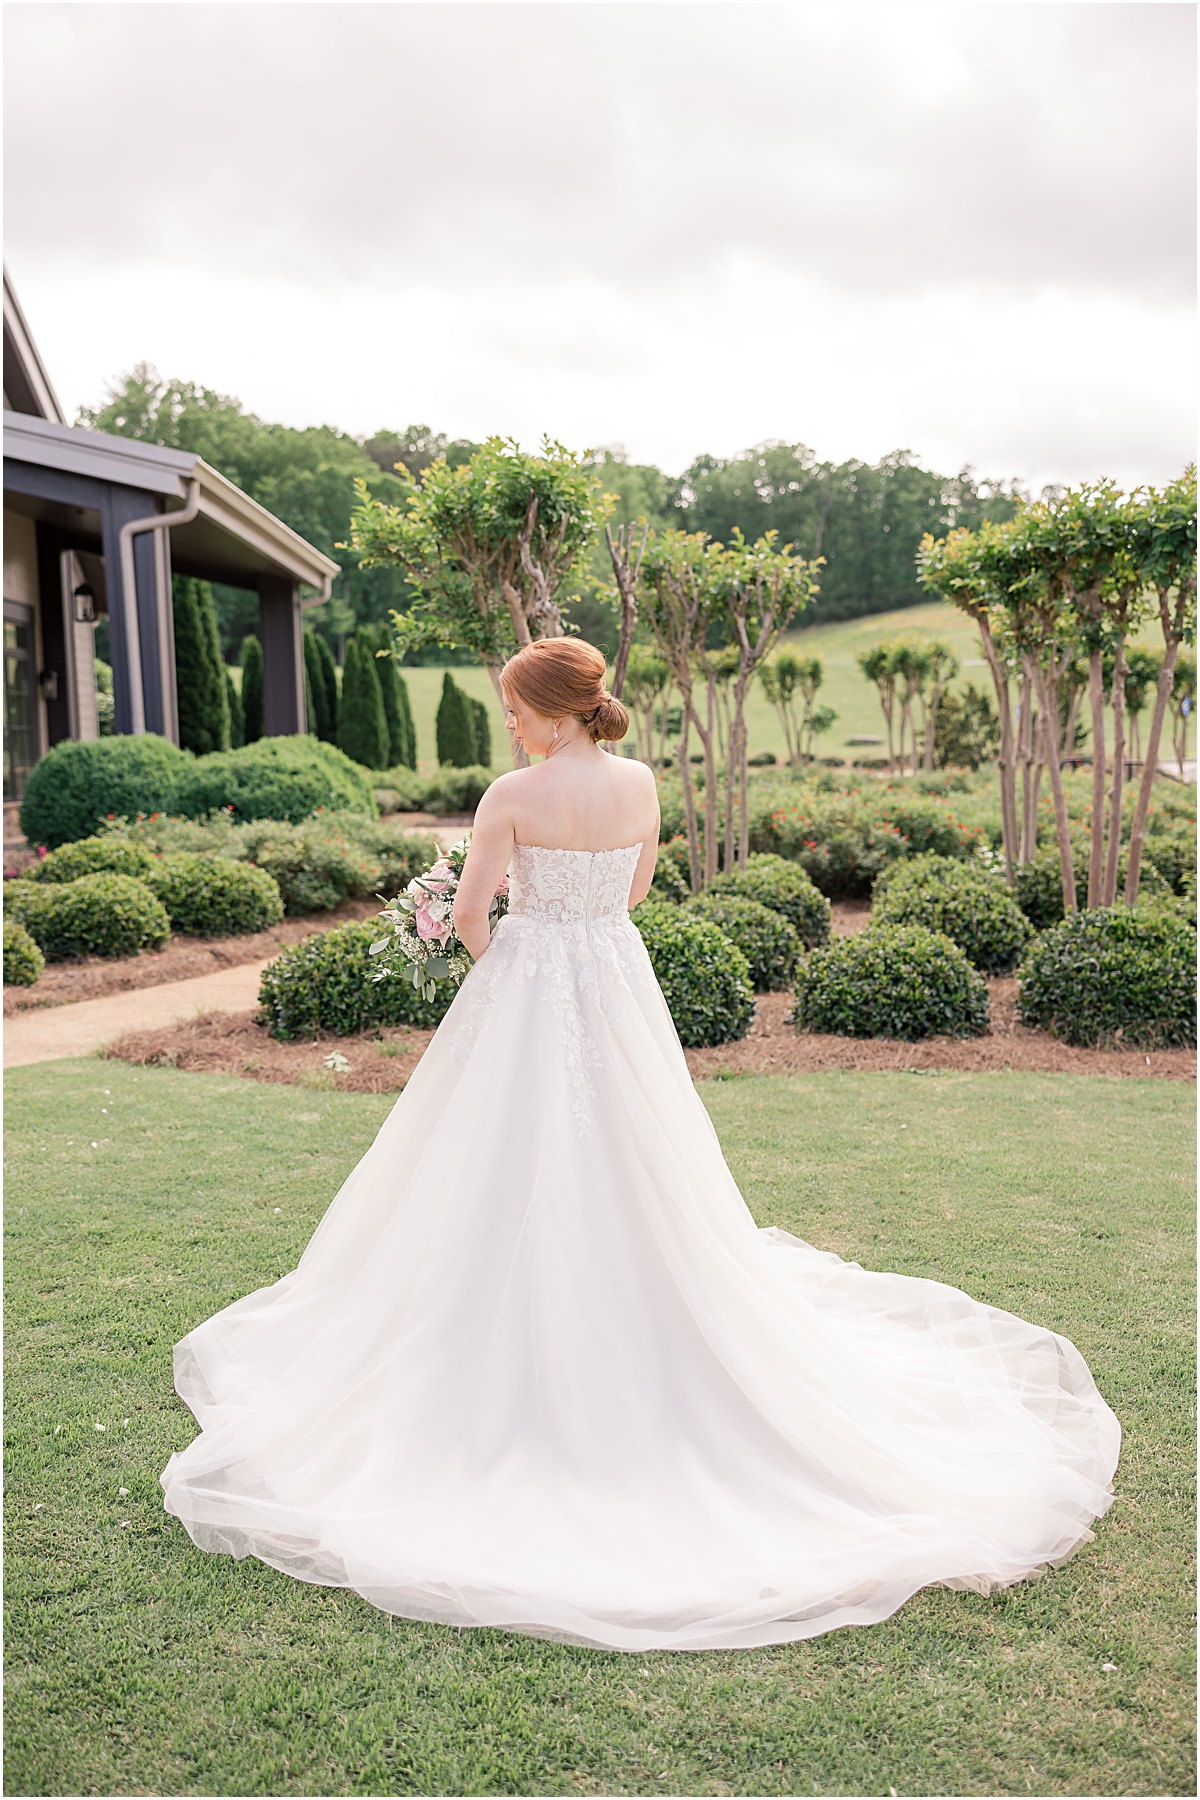 Bride's dress completely flared out at Cleveland GA Wedding Venues